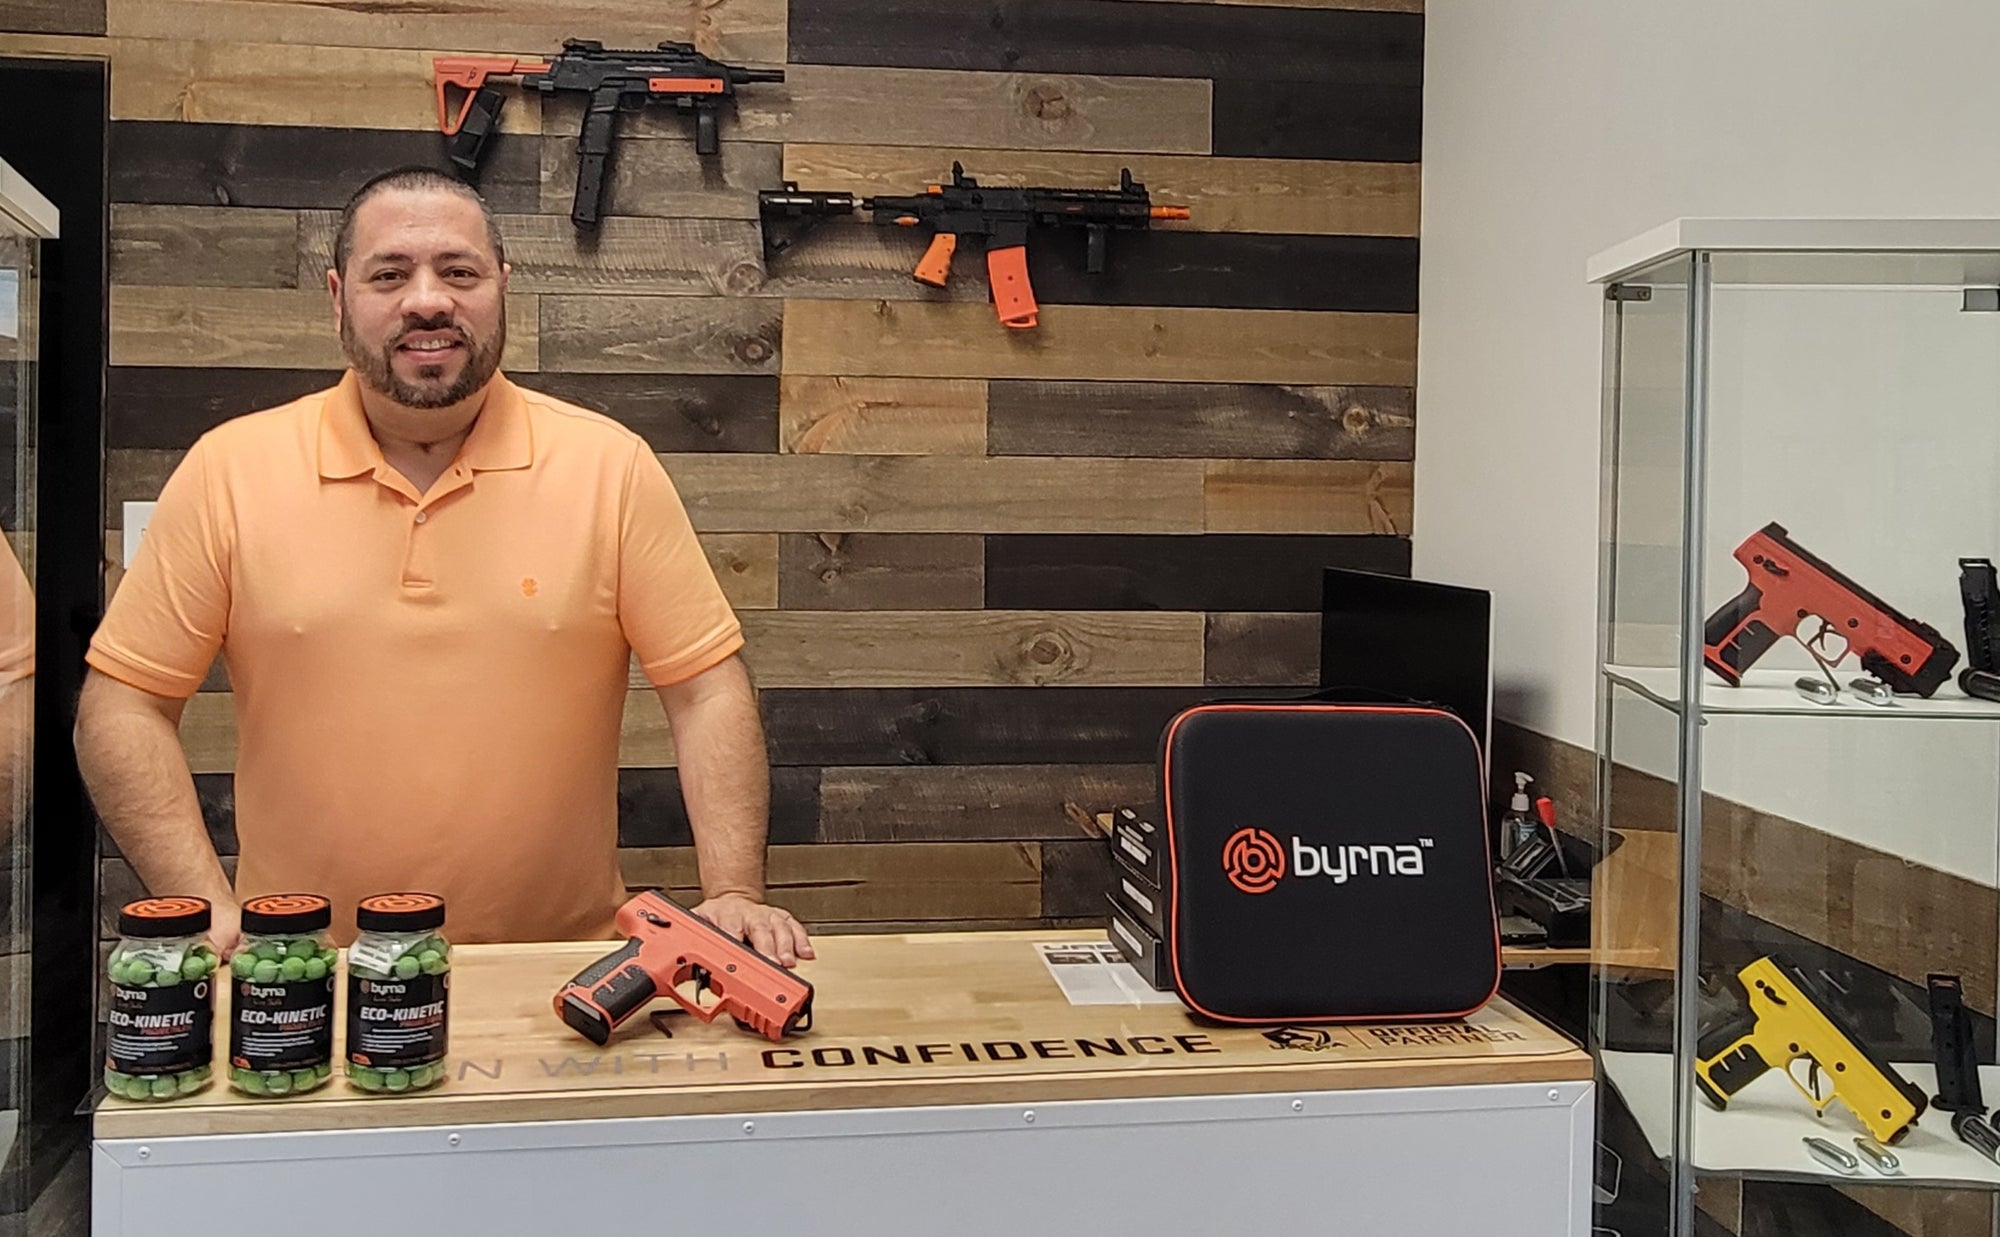 Grand Opening of Urban 2A - Byrna Premier Dealer in Connecticut